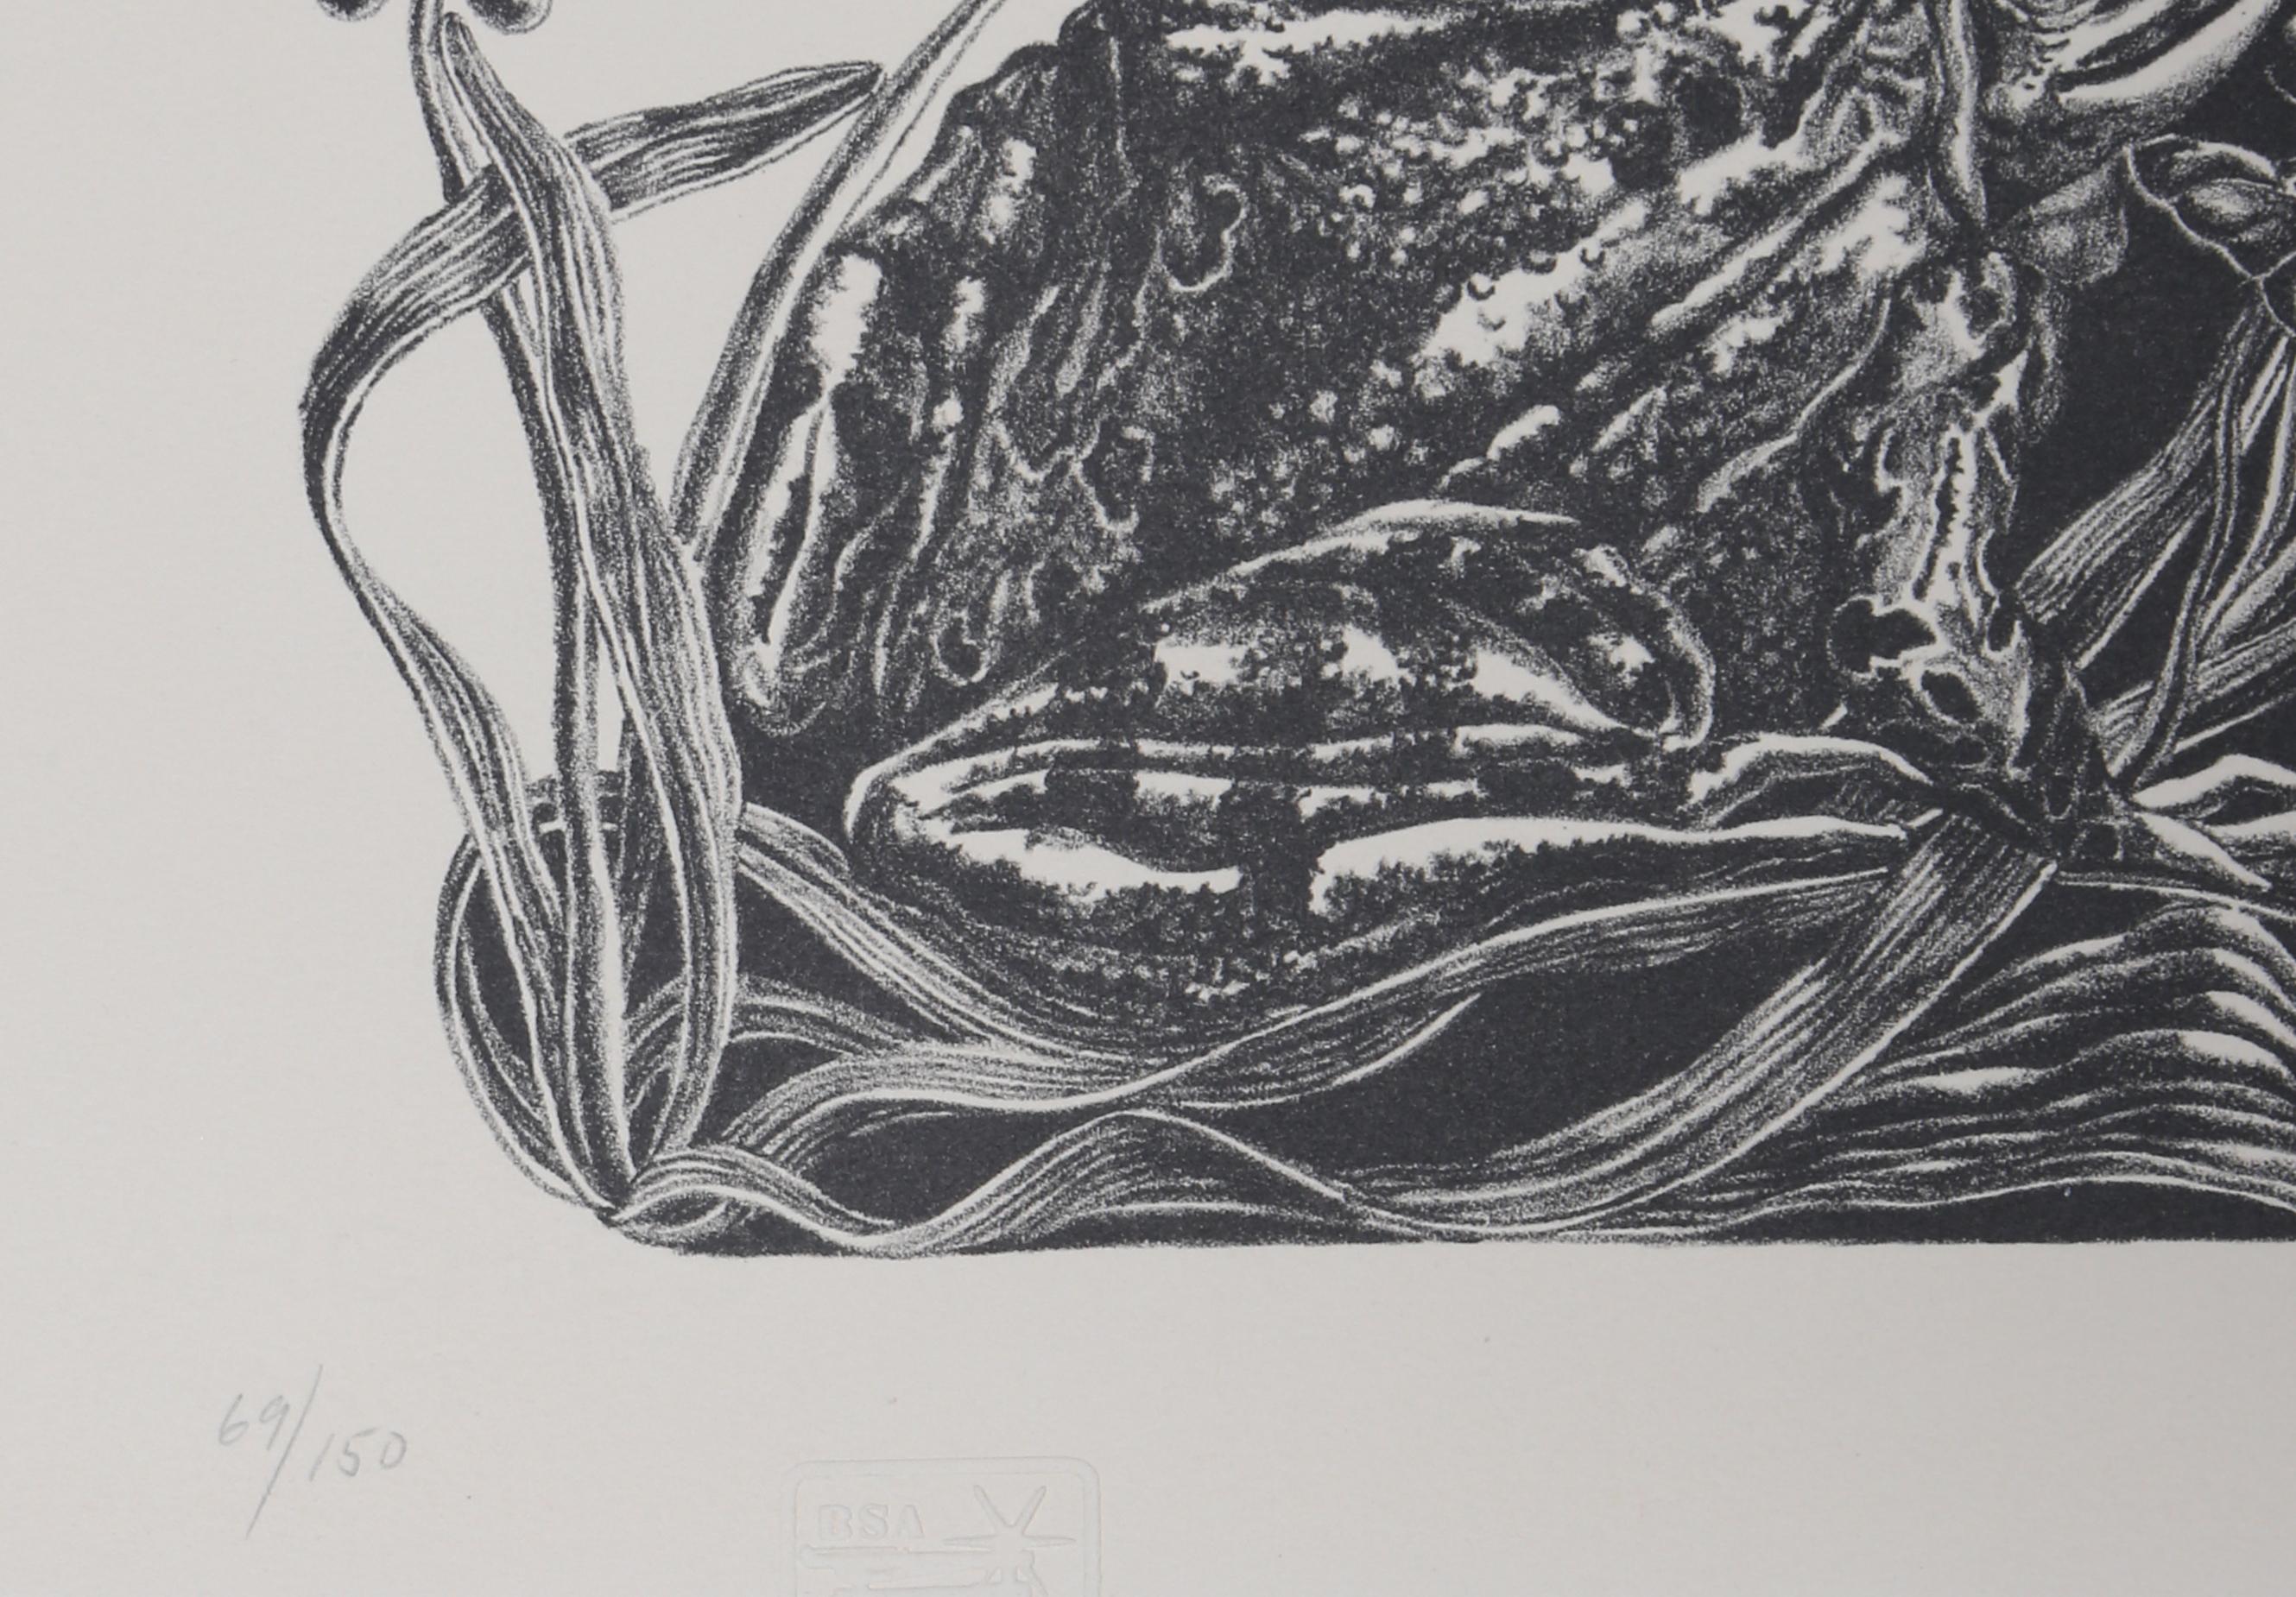 Artist: Jack Beal, American (1931 - 2013)
Title: Frogs and Toads - Conspiracy: The Artist as Witness
Year: 1971
Medium: Lithograph, signed and numbered in pencil
Edition: 150
Size: 18 in. x 24 in. (45.72 cm x 60.96 cm)